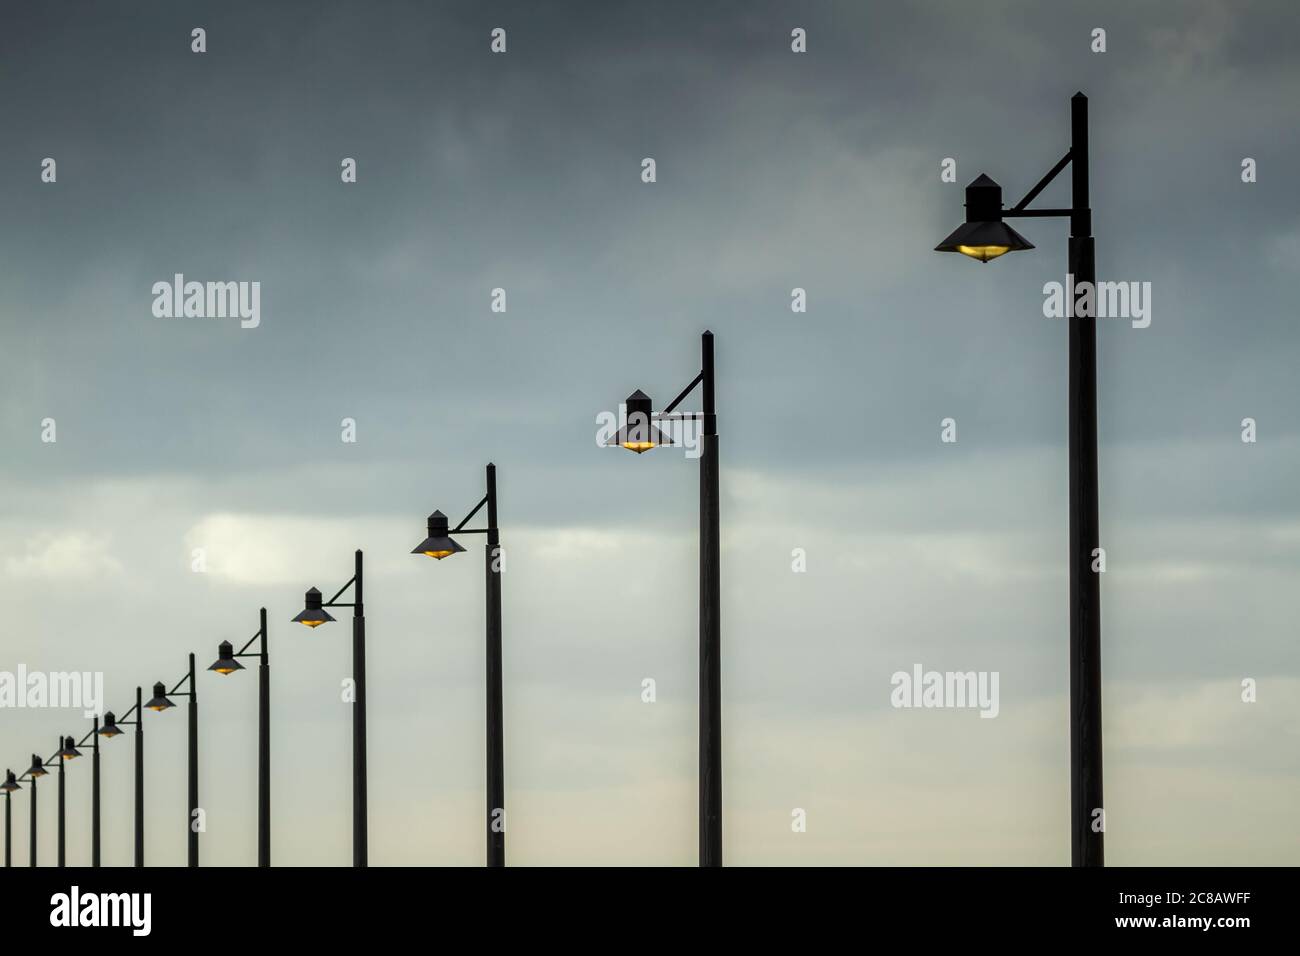 Shorncliffe Pier on a stormy rainy day. Stock Photo